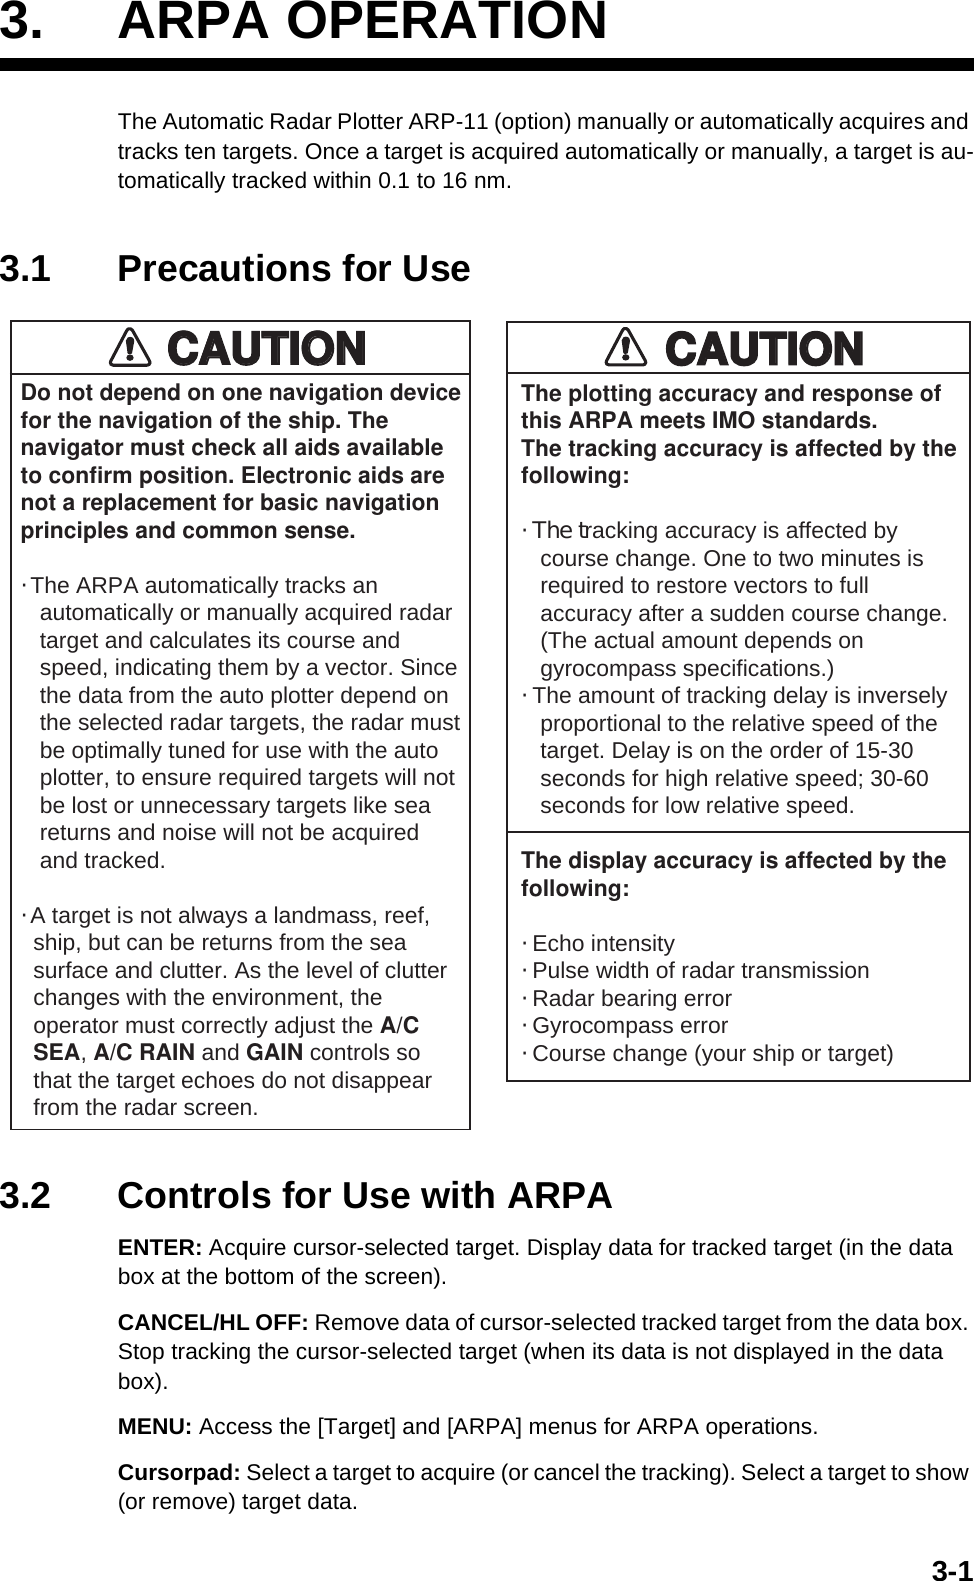 3-13. ARPA OPERATIONThe Automatic Radar Plotter ARP-11 (option) manually or automatically acquires and tracks ten targets. Once a target is acquired automatically or manually, a target is au-tomatically tracked within 0.1 to 16 nm.3.1 Precautions for Use3.2 Controls for Use with ARPAENTER: Acquire cursor-selected target. Display data for tracked target (in the data box at the bottom of the screen).CANCEL/HL OFF: Remove data of cursor-selected tracked target from the data box. Stop tracking the cursor-selected target (when its data is not displayed in the data box).MENU: Access the [Target] and [ARPA] menus for ARPA operations.Cursorpad: Select a target to acquire (or cancel the tracking). Select a target to show (or remove) target data.Do not depend on one navigation devicefor the navigation of the ship. Thenavigator must check all aids availableto confirm position. Electronic aids arenot a replacement for basic navigationprinciples and common sense.· The ARPA automatically tracks an   automatically or manually acquired radar   target and calculates its course and   speed, indicating them by a vector. Since   the data from the auto plotter depend on   the selected radar targets, the radar must   be optimally tuned for use with the auto   plotter, to ensure required targets will not   be lost or unnecessary targets like sea   returns and noise will not be acquired   and tracked.· A target is not always a landmass, reef,  ship, but can be returns from the sea  surface and clutter. As the level of clutter  changes with the environment, the  operator must correctly adjust the A/C  SEA, A/C RAIN and GAIN controls so  that the target echoes do not disappear  from the radar screen.The plotting accuracy and response ofthis ARPA meets IMO standards.The tracking accuracy is affected by thefollowing:· The tracking accuracy is affected by   course change. One to two minutes is   required to restore vectors to full   accuracy after a sudden course change.   (The actual amount depends on   gyrocompass specifications.)· The amount of tracking delay is inversely   proportional to the relative speed of the   target. Delay is on the order of 15-30   seconds for high relative speed; 30-60   seconds for low relative speed.The display accuracy is affected by thefollowing:· Echo intensity· Pulse width of radar transmission· Radar bearing error· Gyrocompass error· Course change (your ship or target)CAUTIONCAUTIONCAUTIONCAUTION